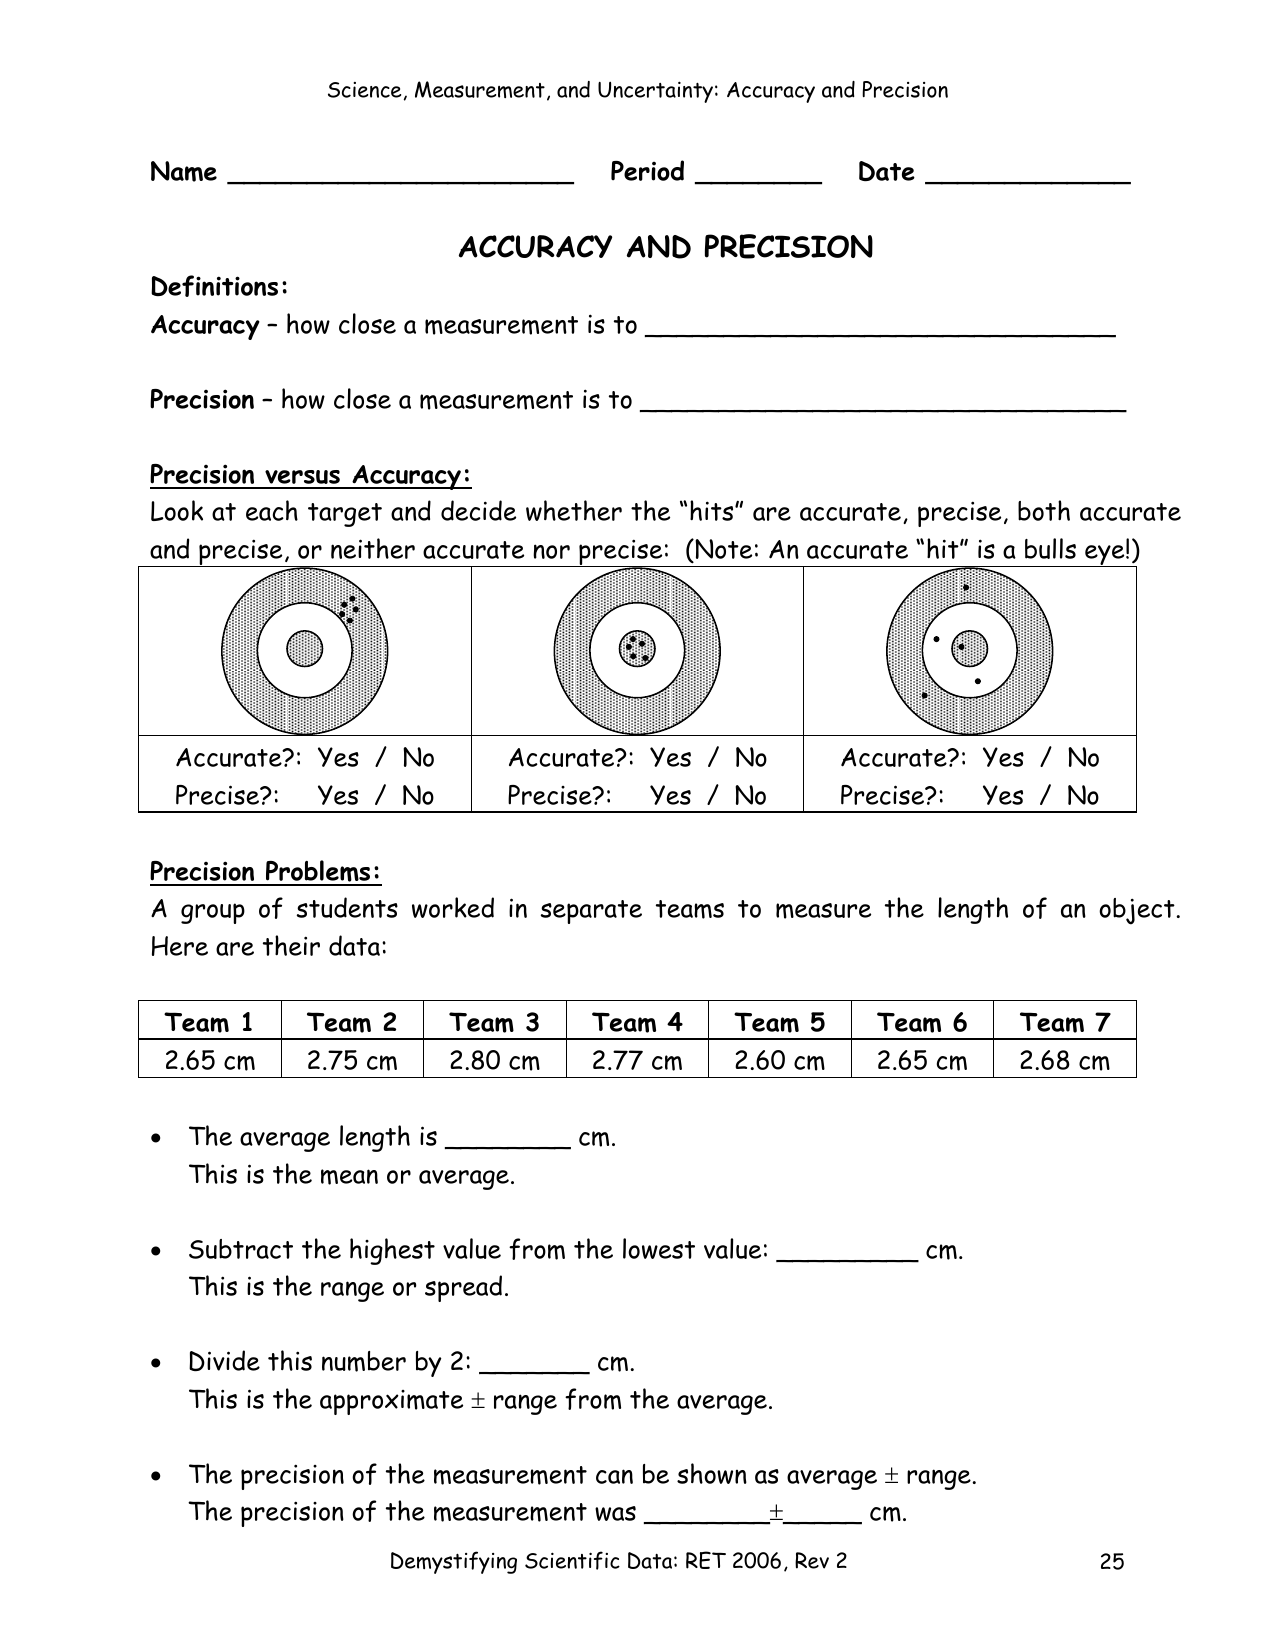 Worksheet-Accuracy and Precision-Final Intended For Accuracy Vs Precision Worksheet